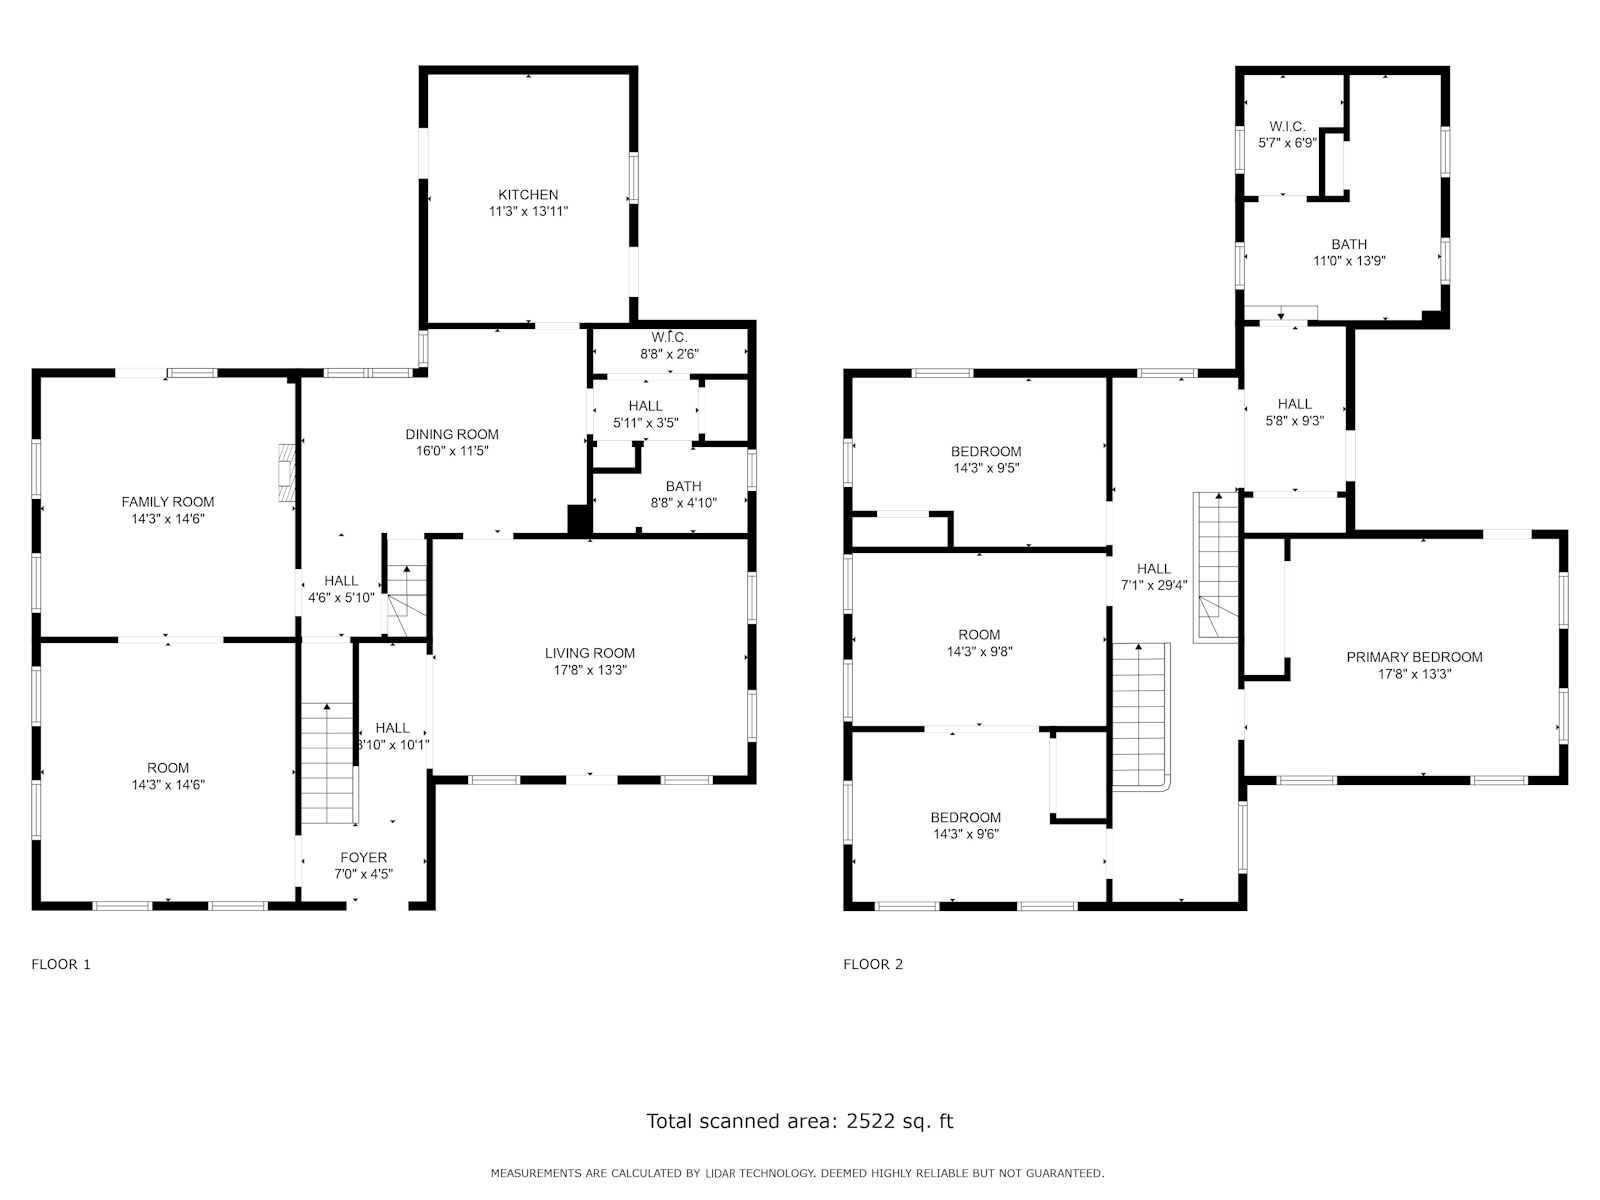 Floorplan for 2279 Route 9